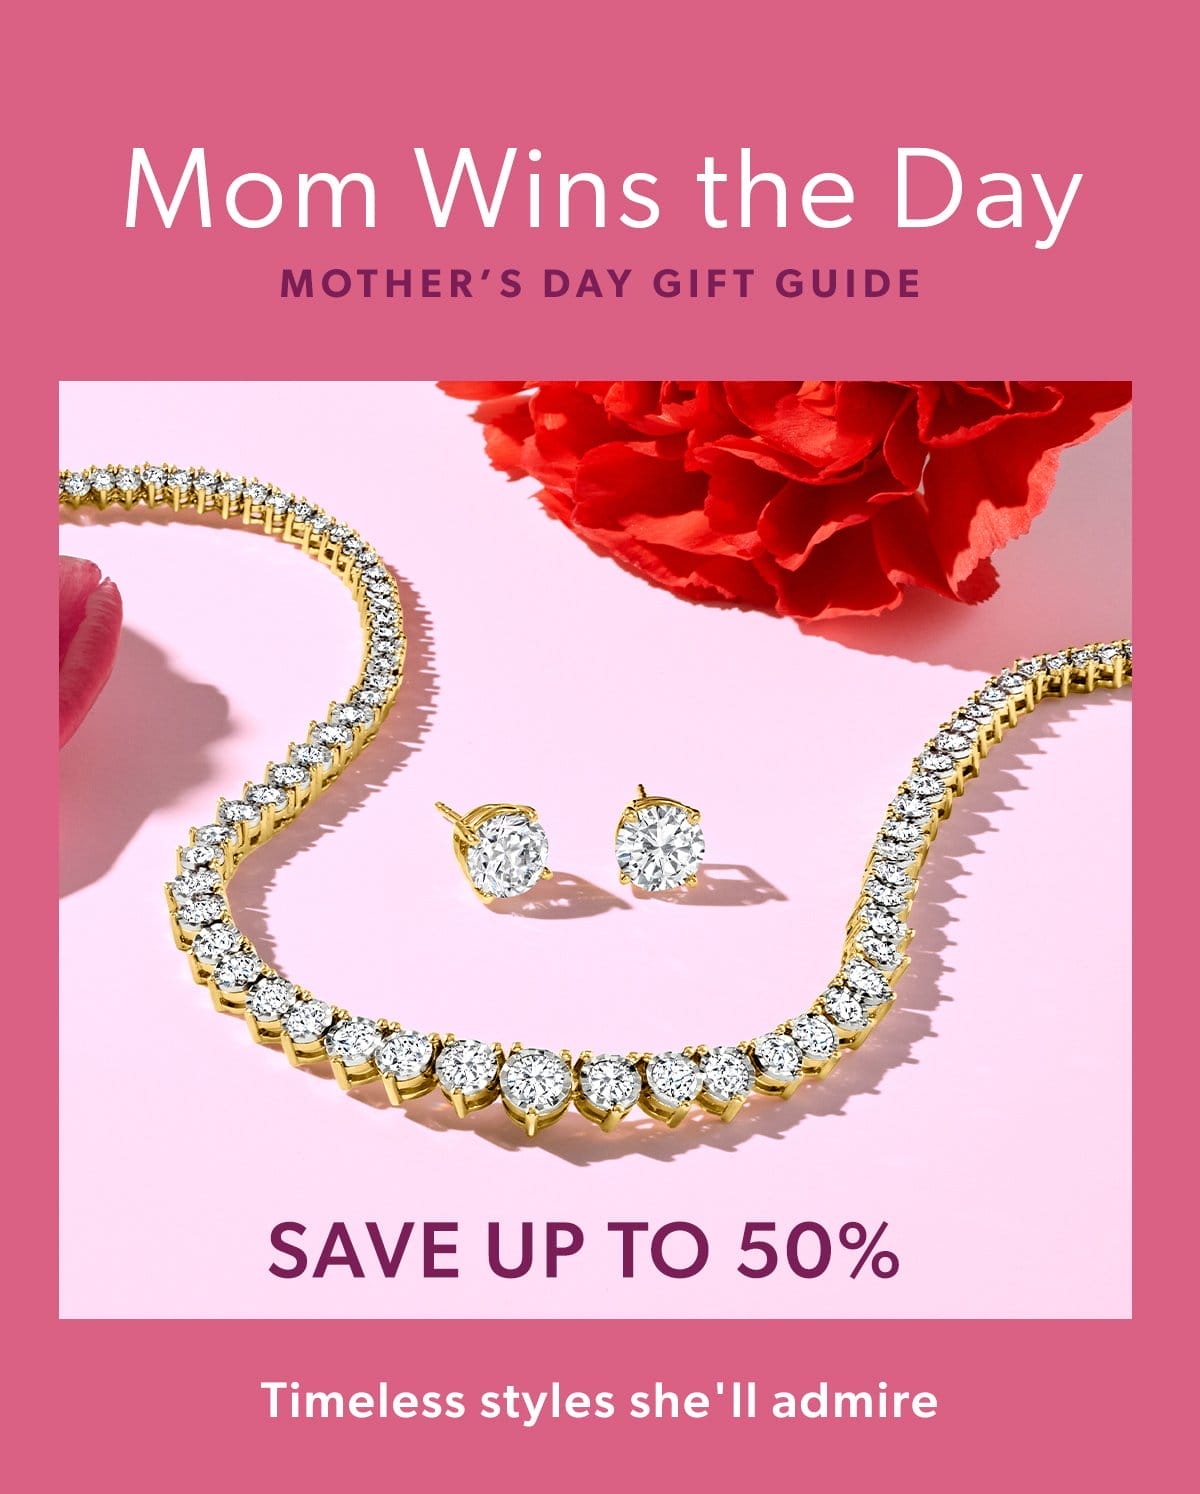 Mother's Day Gift Guide. Save Up To 50%